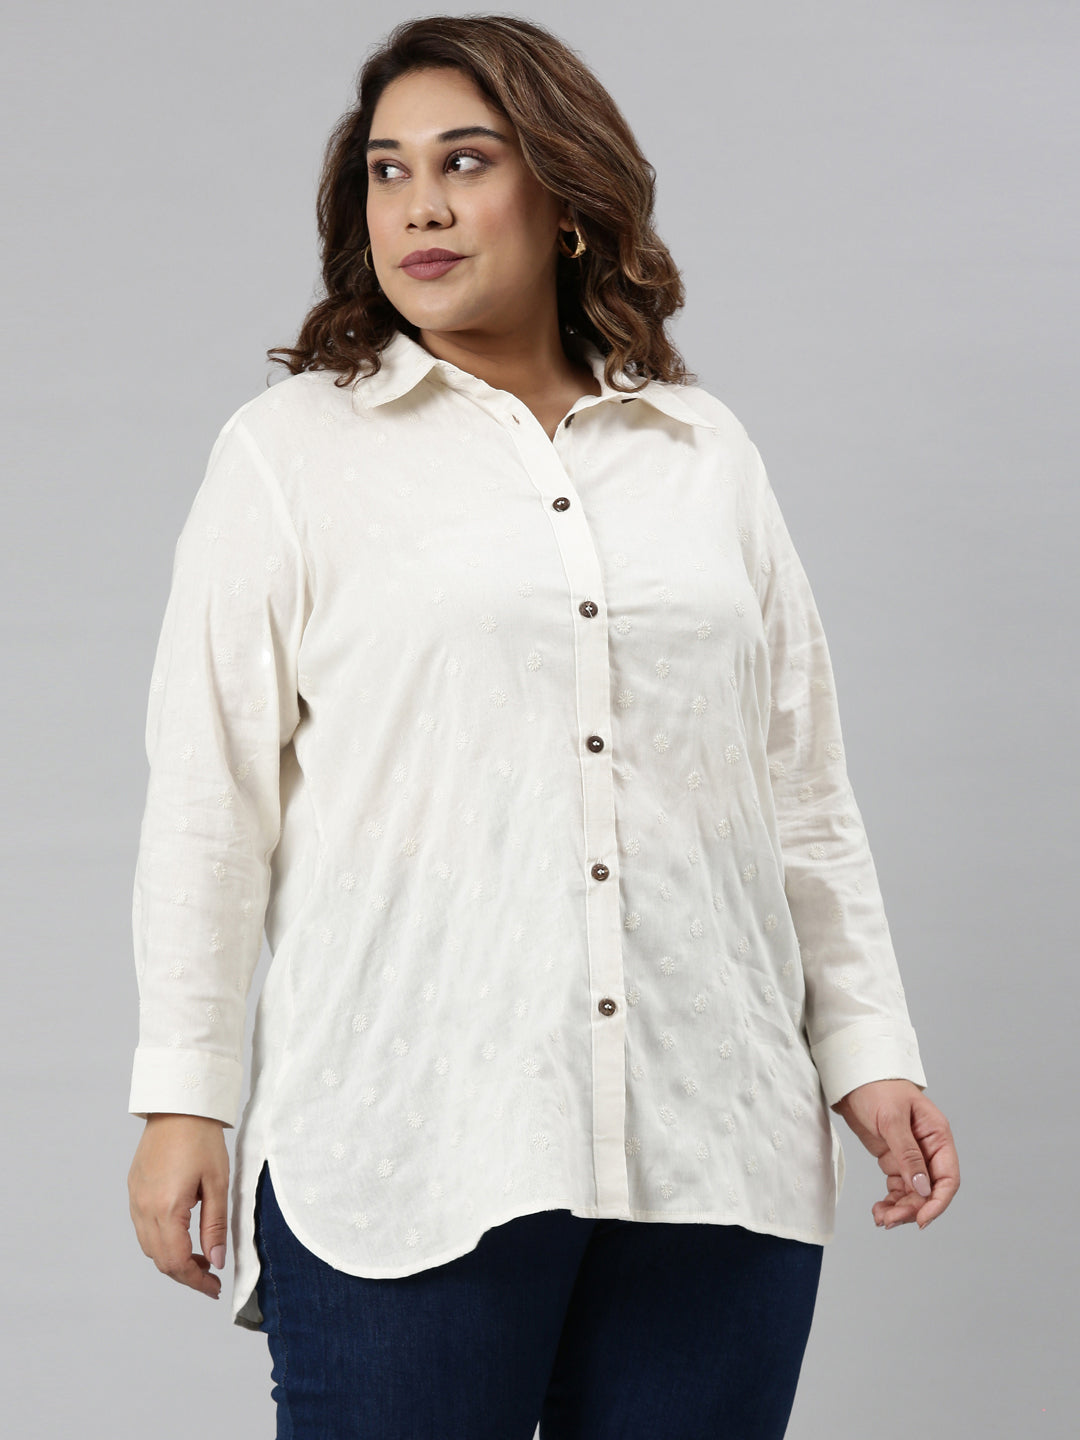 WHITE EMBROIDERY SHIRT